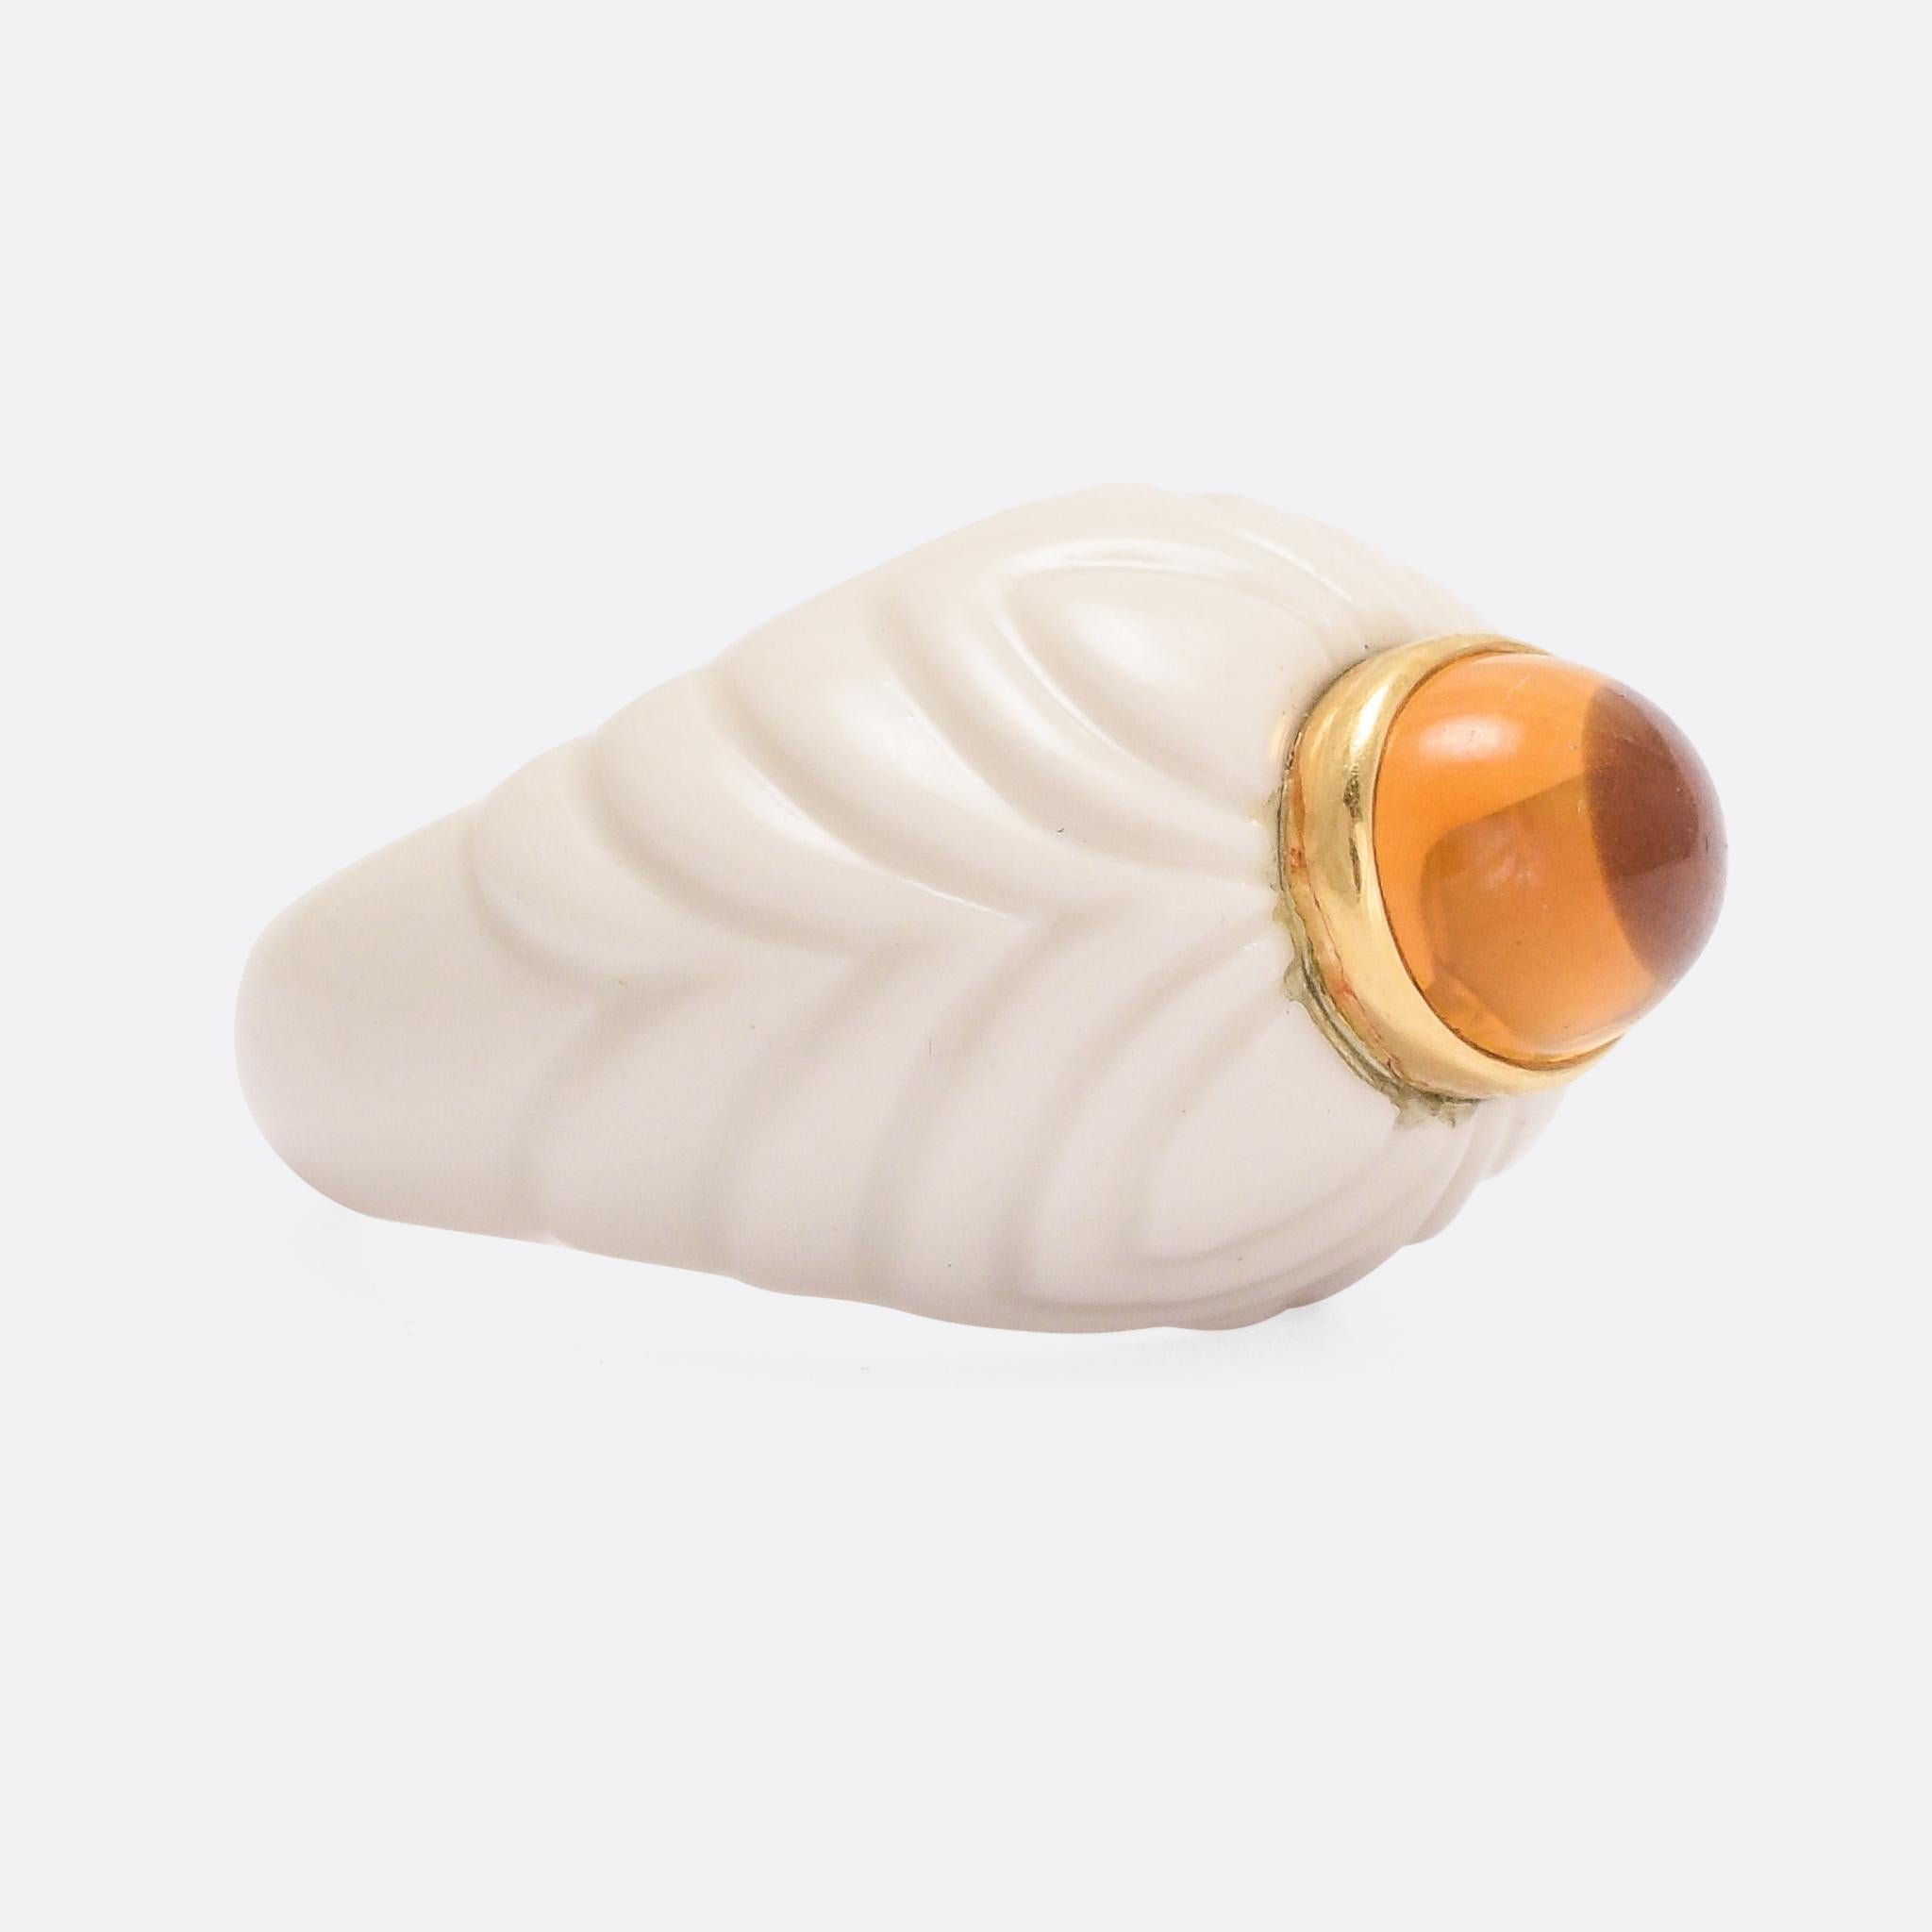 A striking vintage Bulgari Chandra ring fashioned in porcelain and set with a vibrant citrine cabochon. The white porcelain has been carved with a flower-like design, and the stone rests in an 18k gold bezel setting. Fully marked Bulgari 750 with